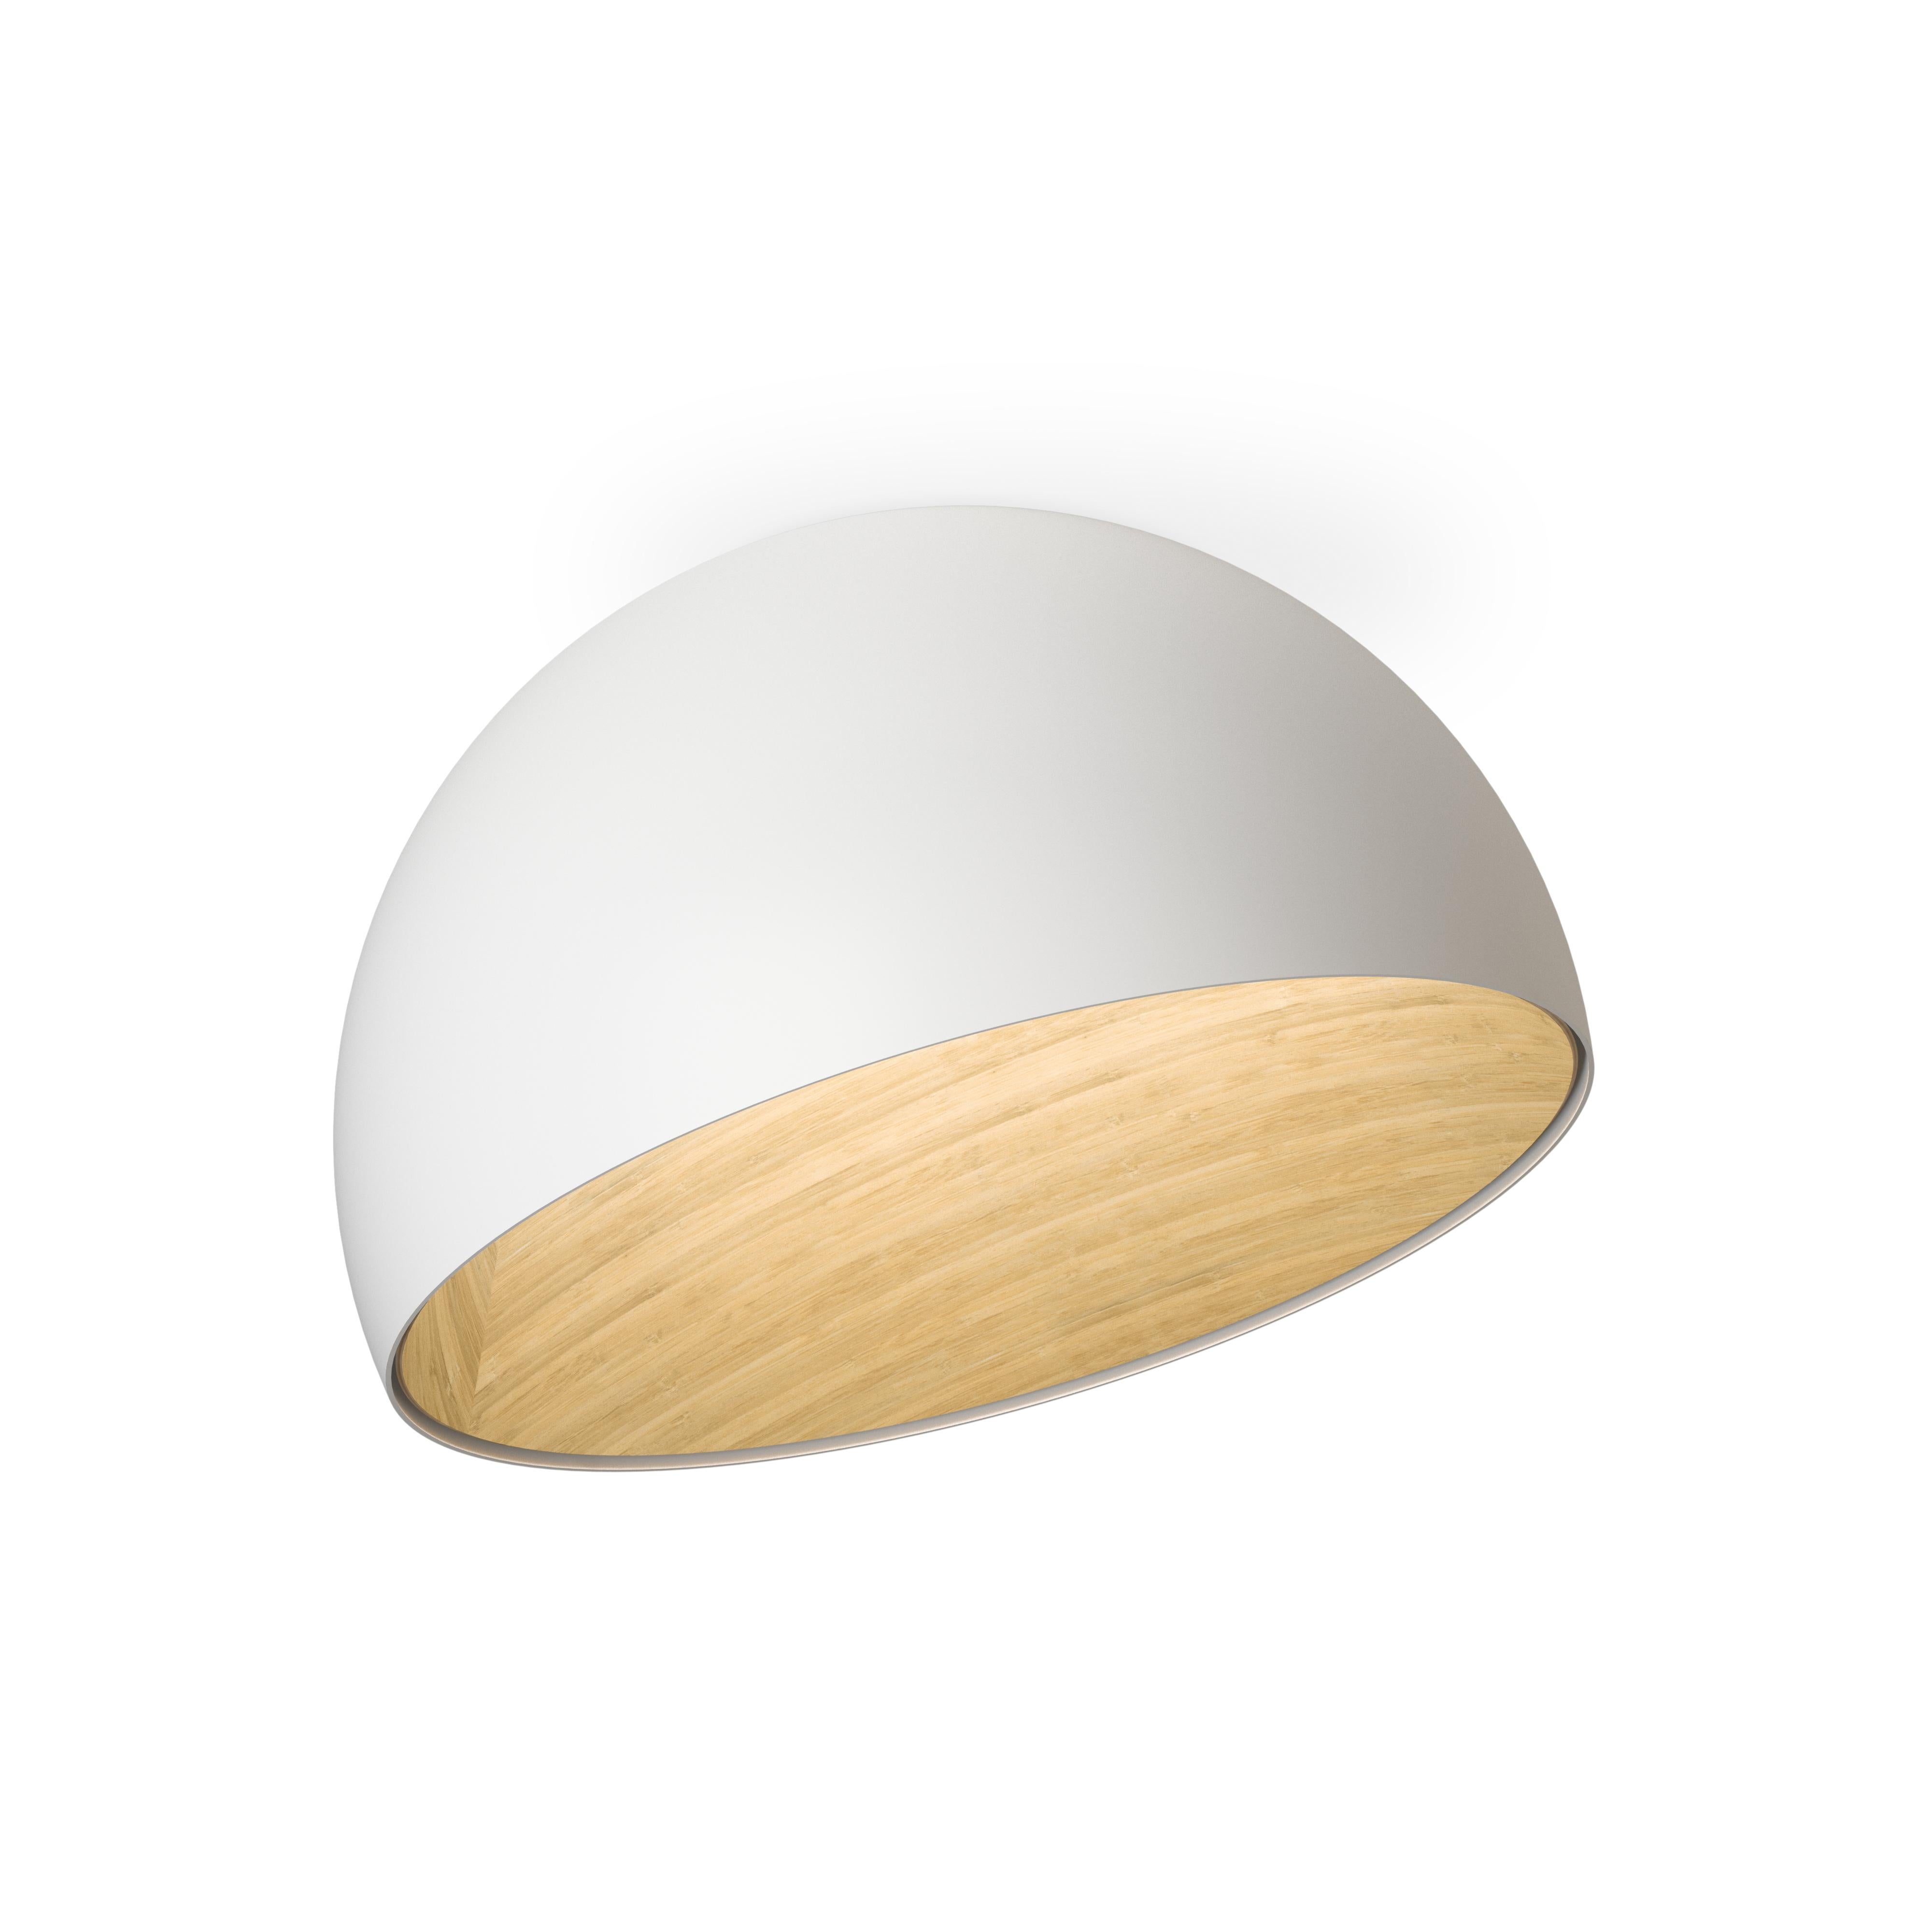 The collection DUO is inspired by sustainability and wellness. This flush-mount surface light is designed for places with a lower ceiling. The inner surface of the shade is lined with oak veneer, enveloped in a matte lacquered outer shell